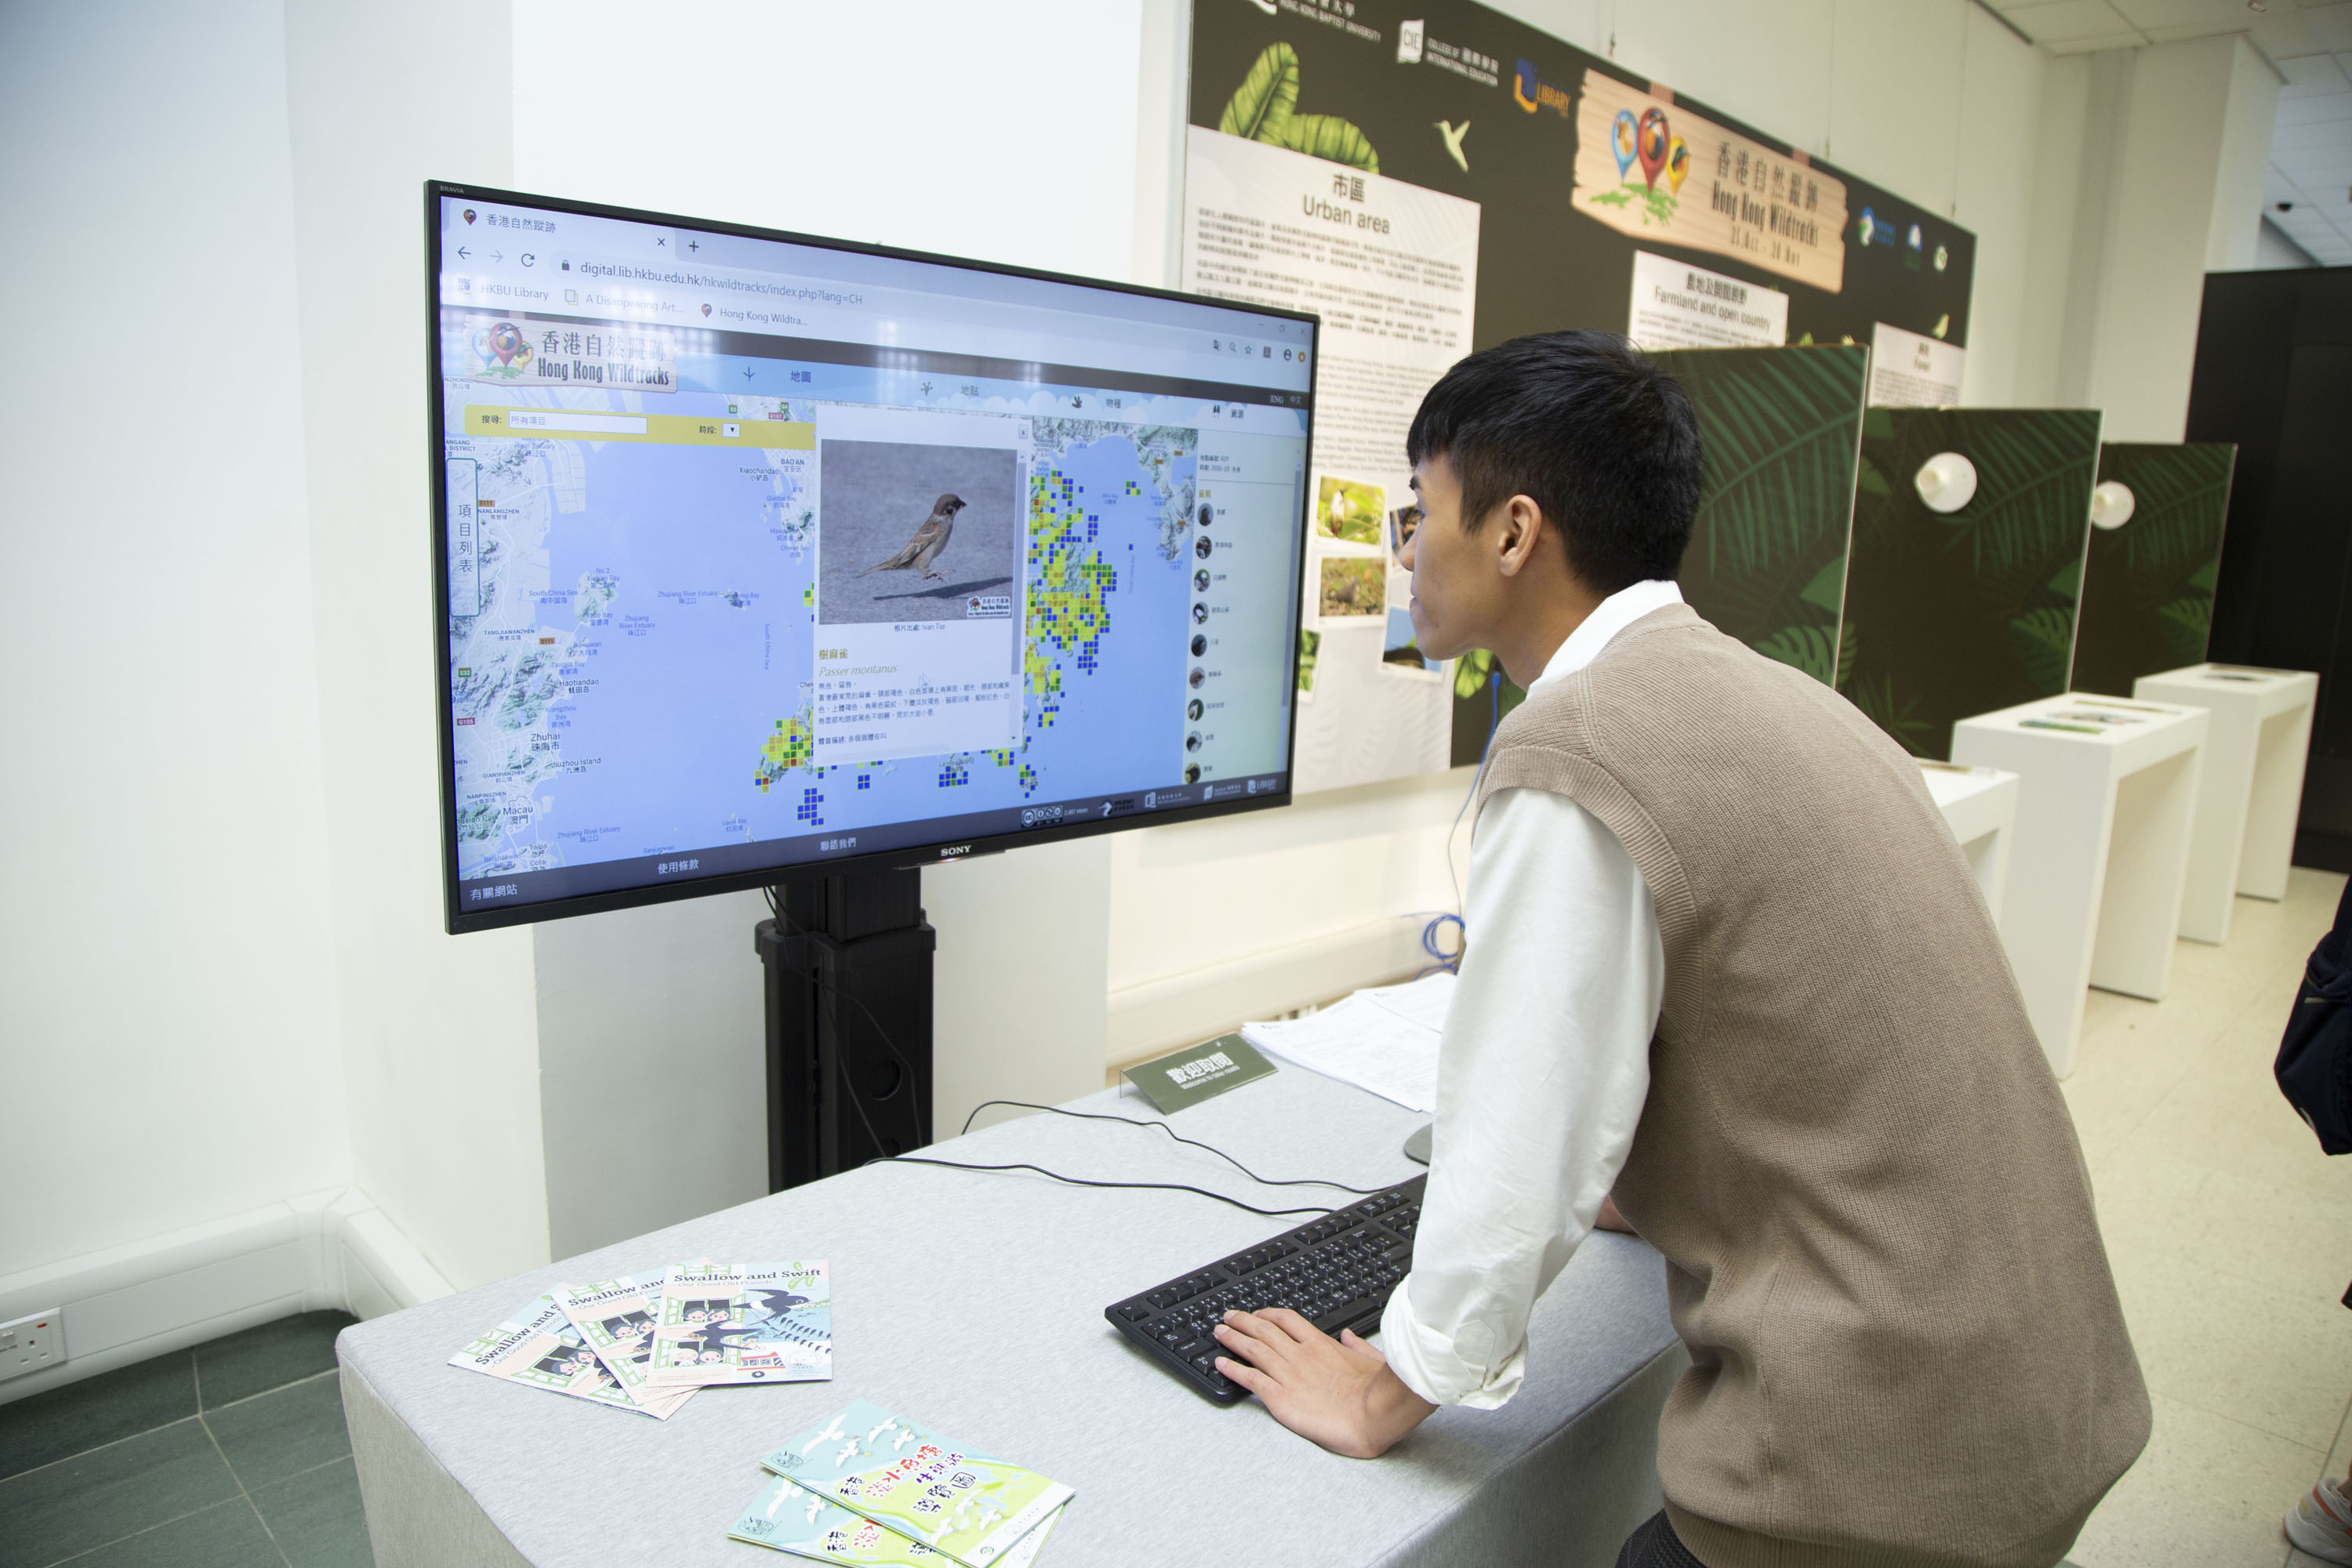 Visitor of “Hong Kong Wildtracks” Exhibition is trying the features and functions of the “Hong Kong Wildtracks” website.